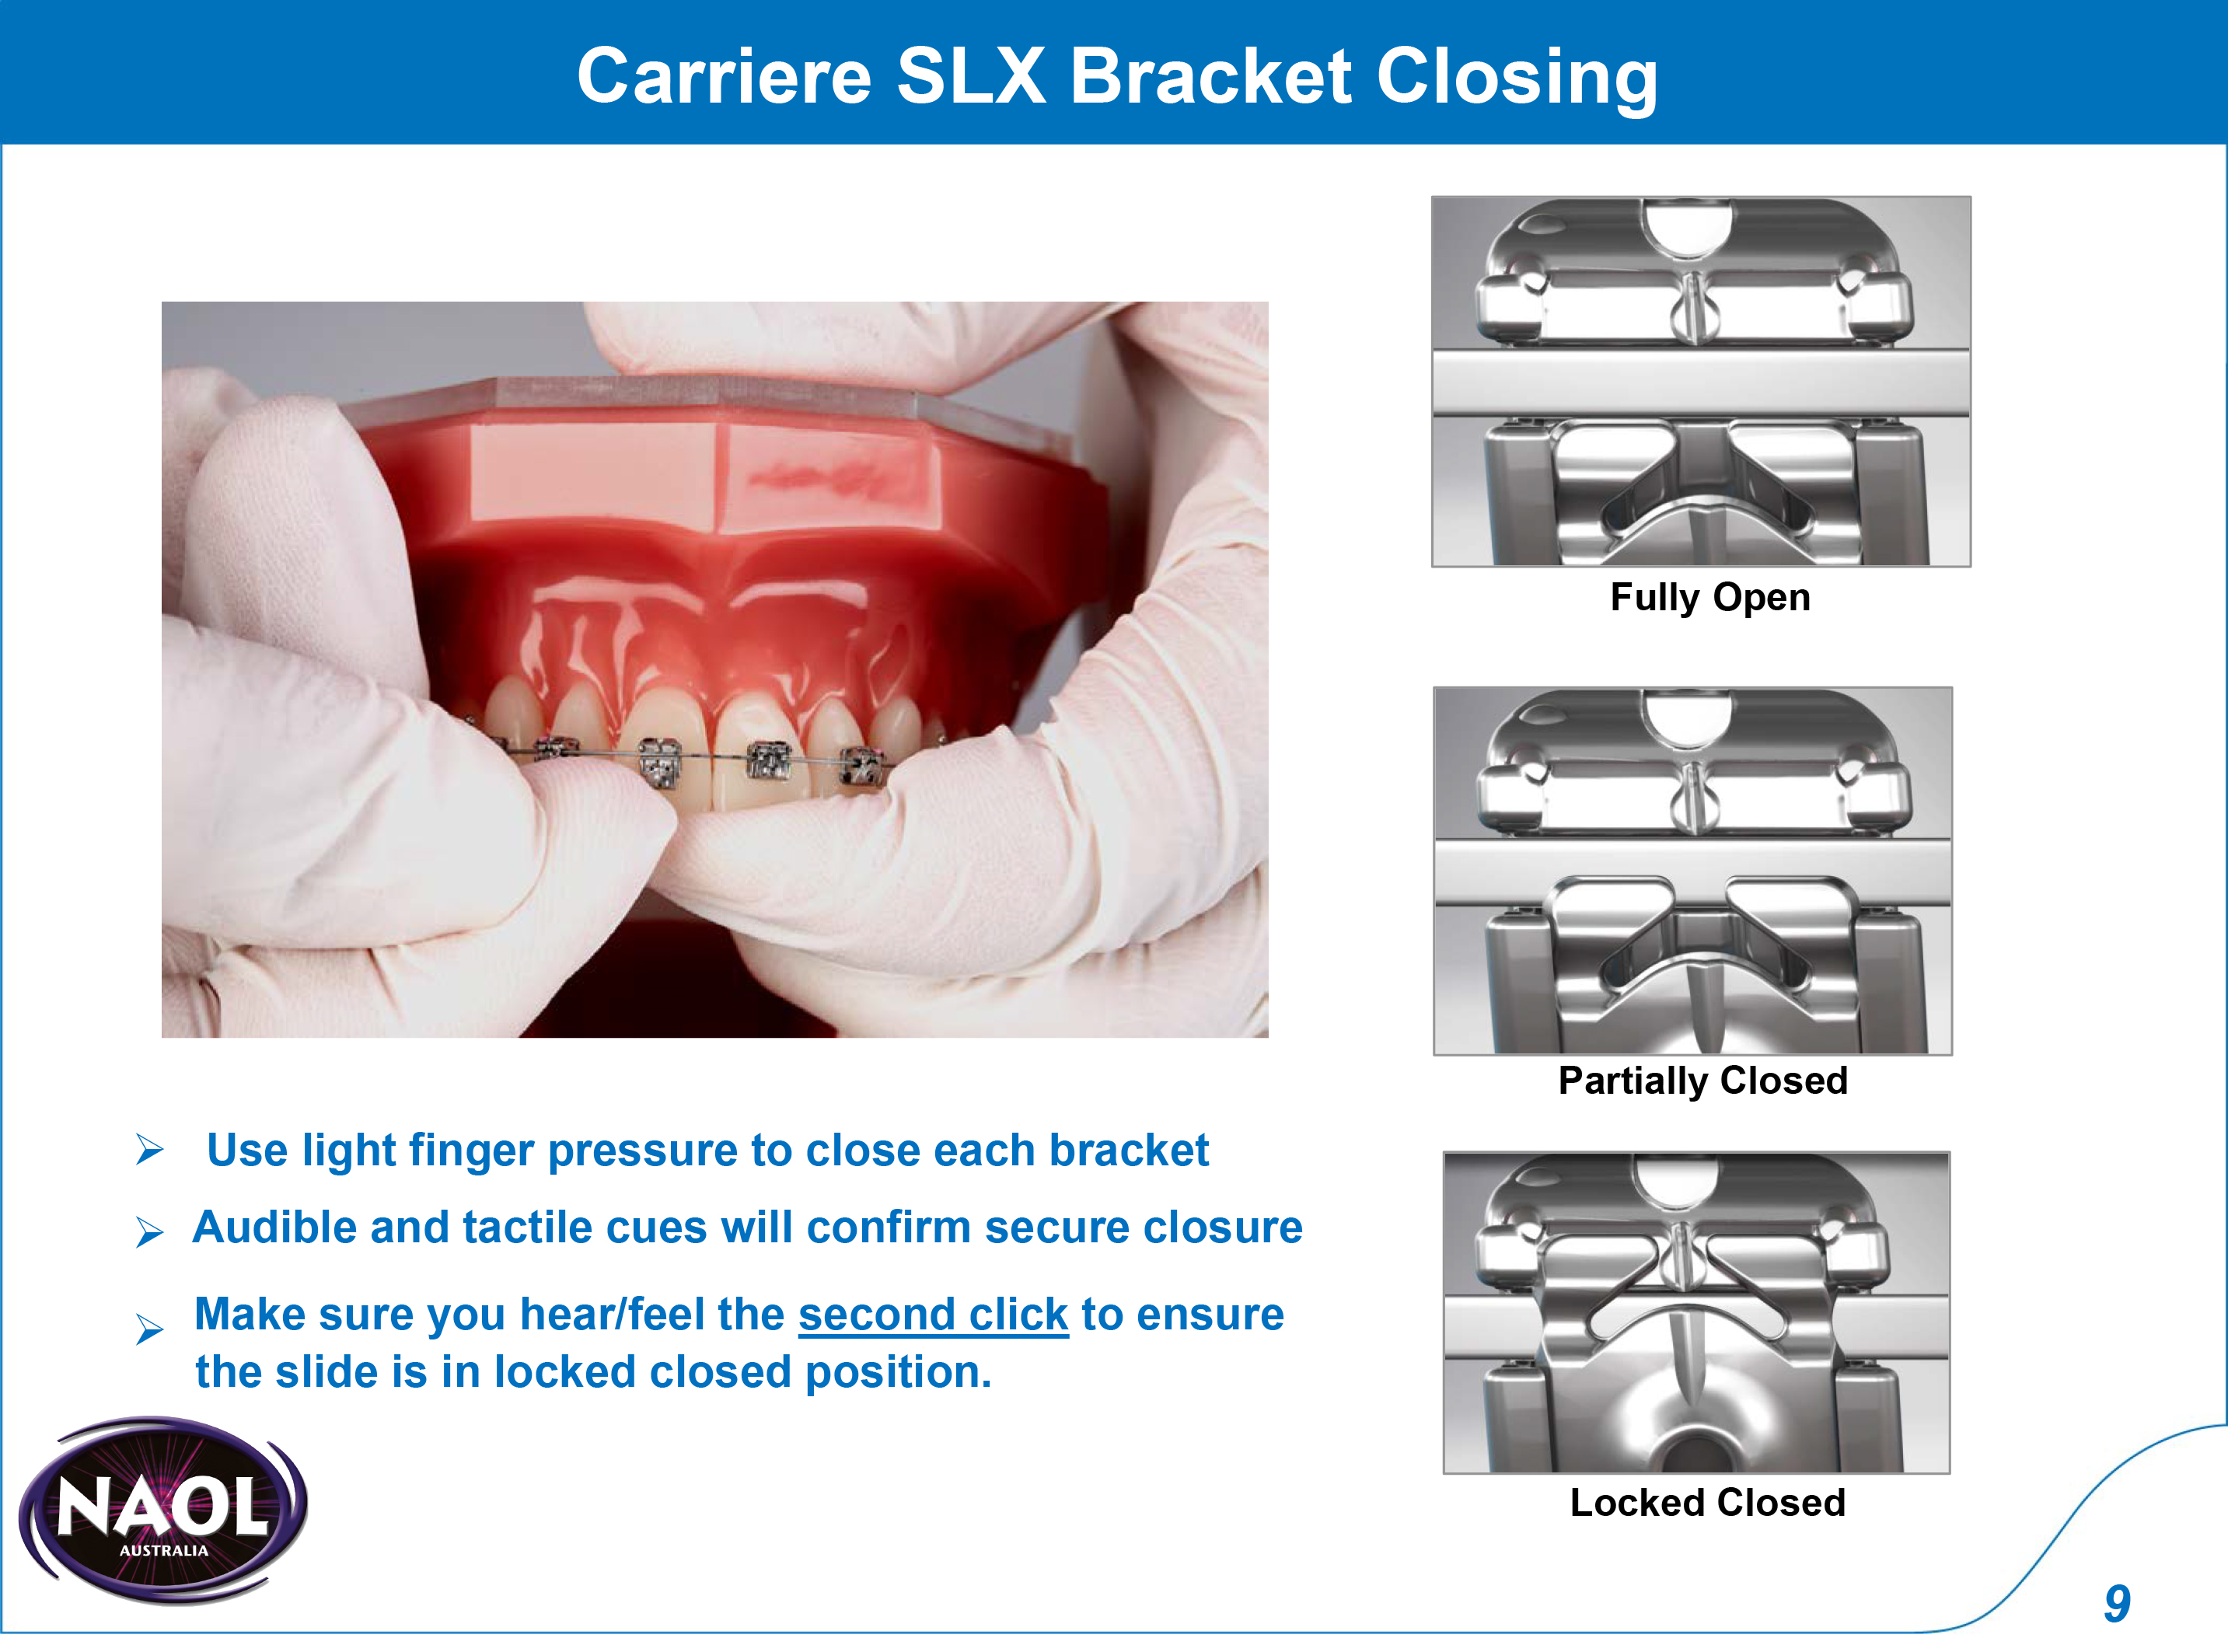 022 CARRIERE SLX MBT UL BICUSPID WITH HOOKS -7T (10)